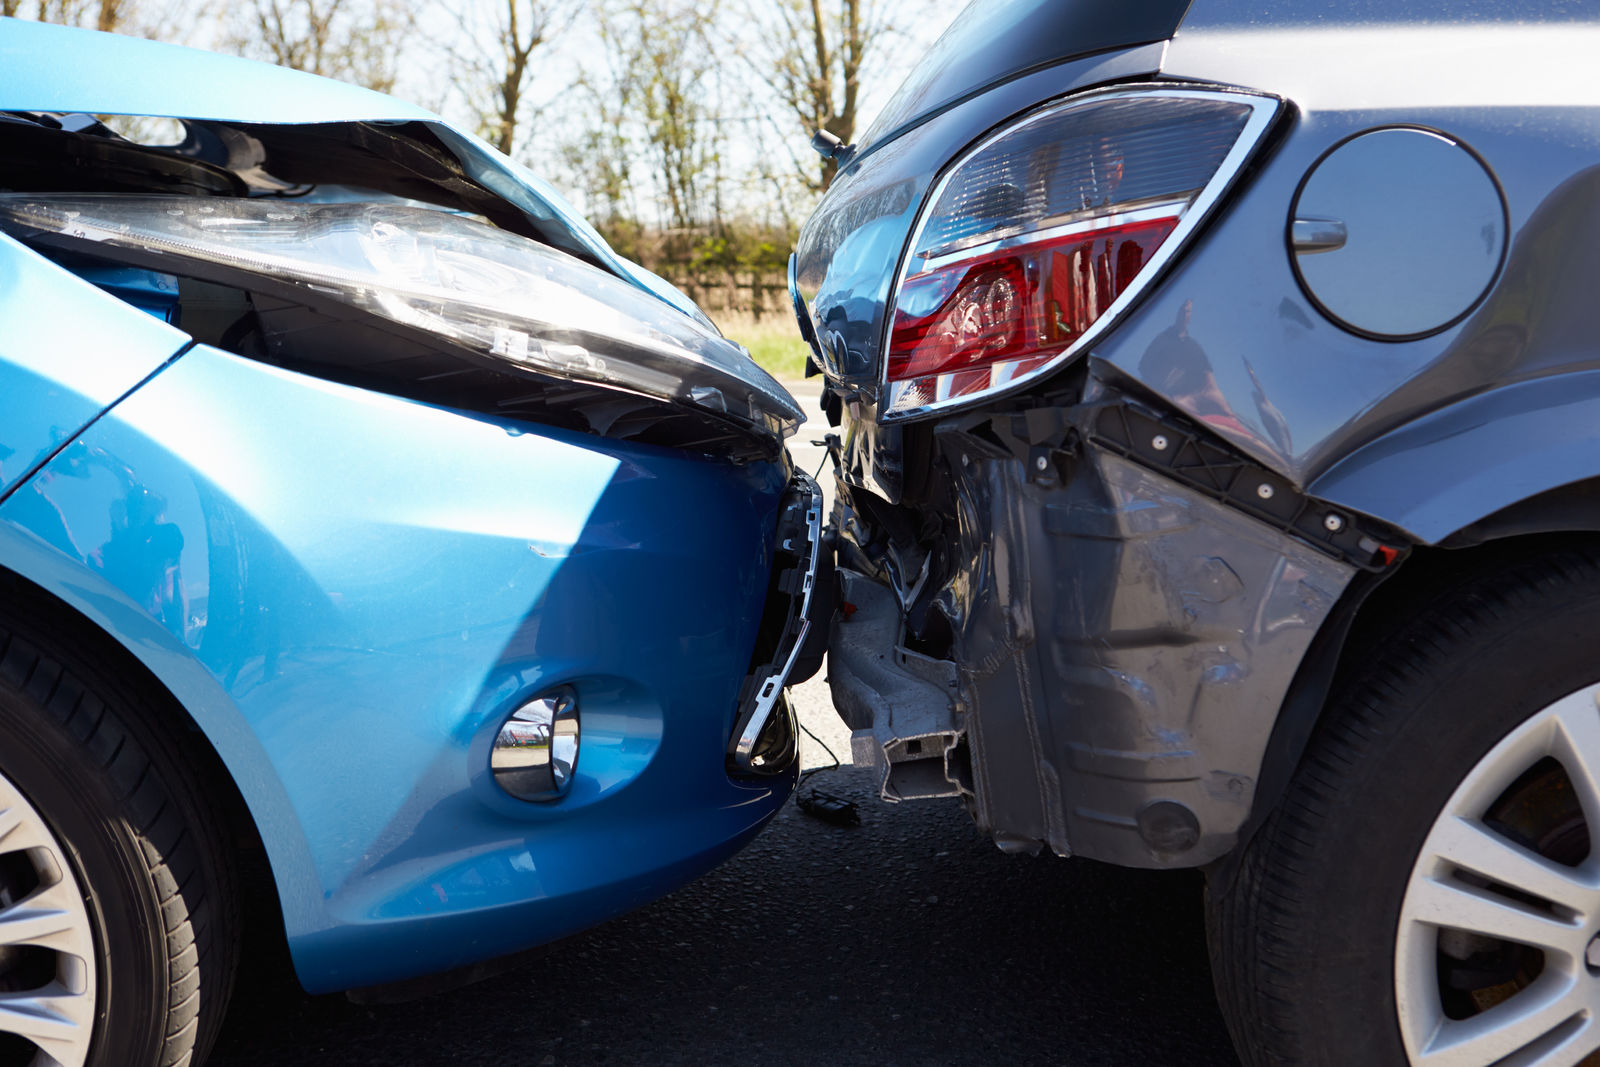 If you crash your friend’s car, whose insurance pays?